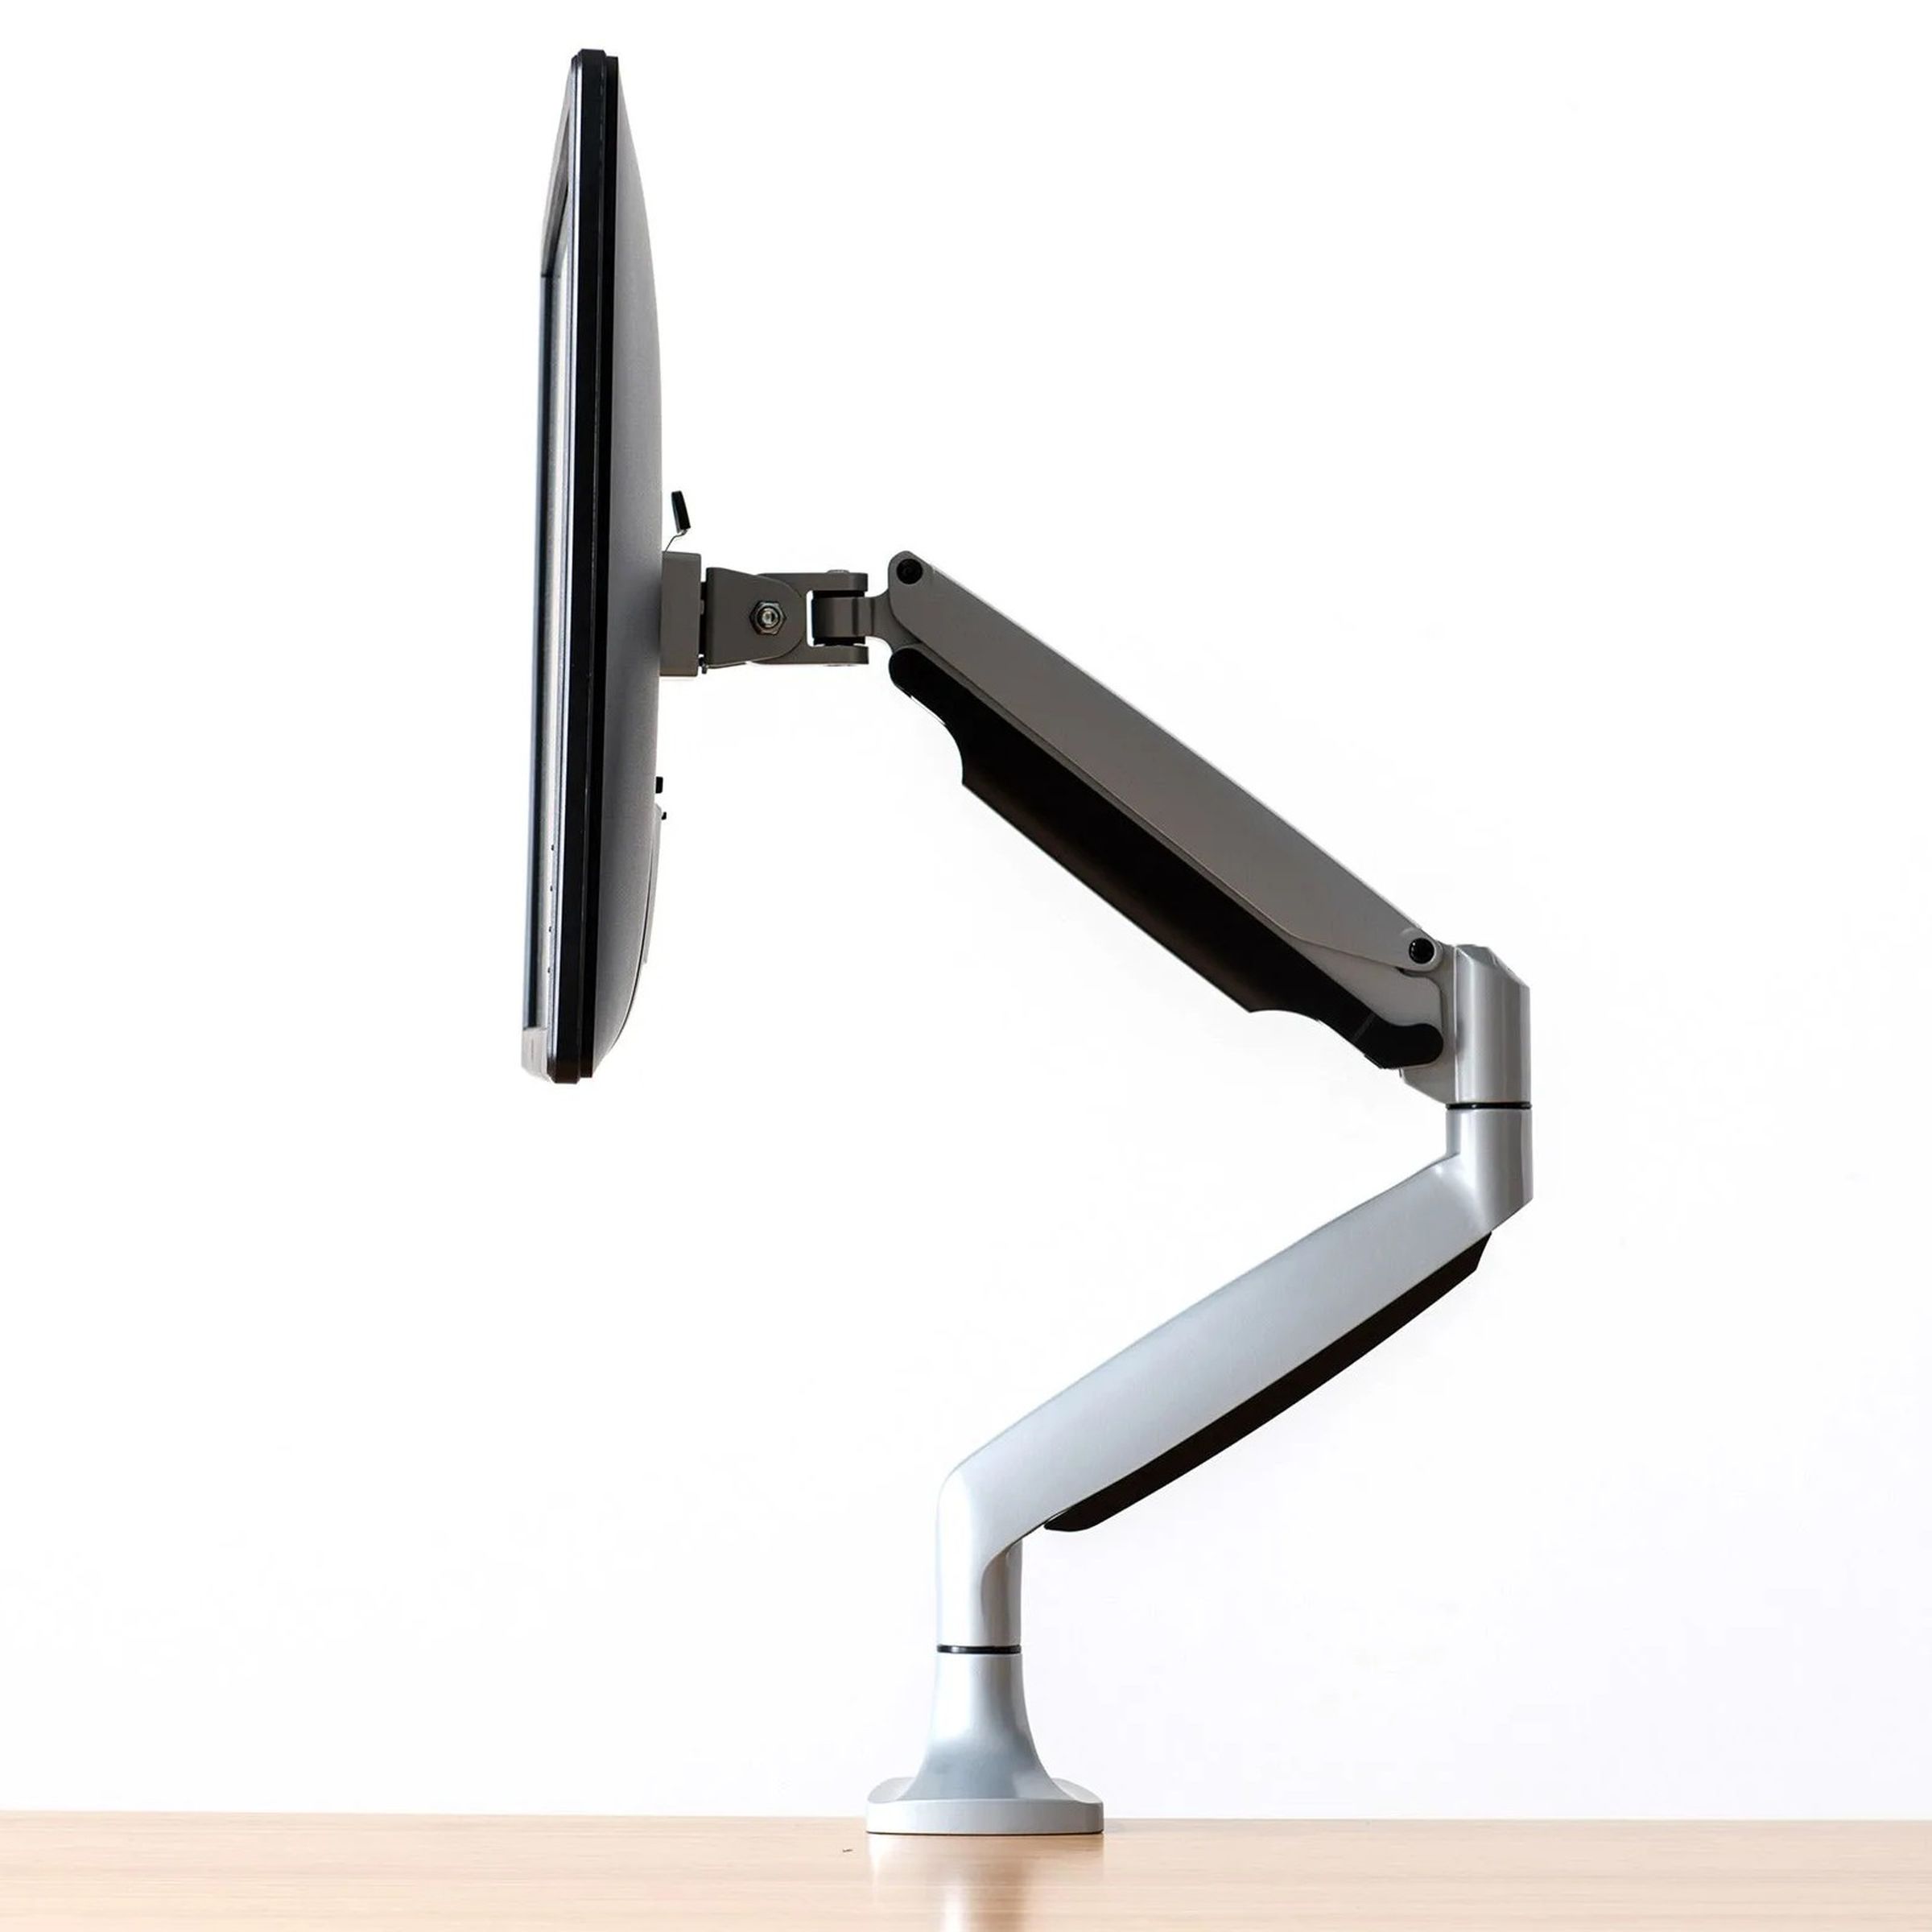 The $129 Fully Jarvis Monitor Arm is a well-reviewed arm with a 15-year warranty.